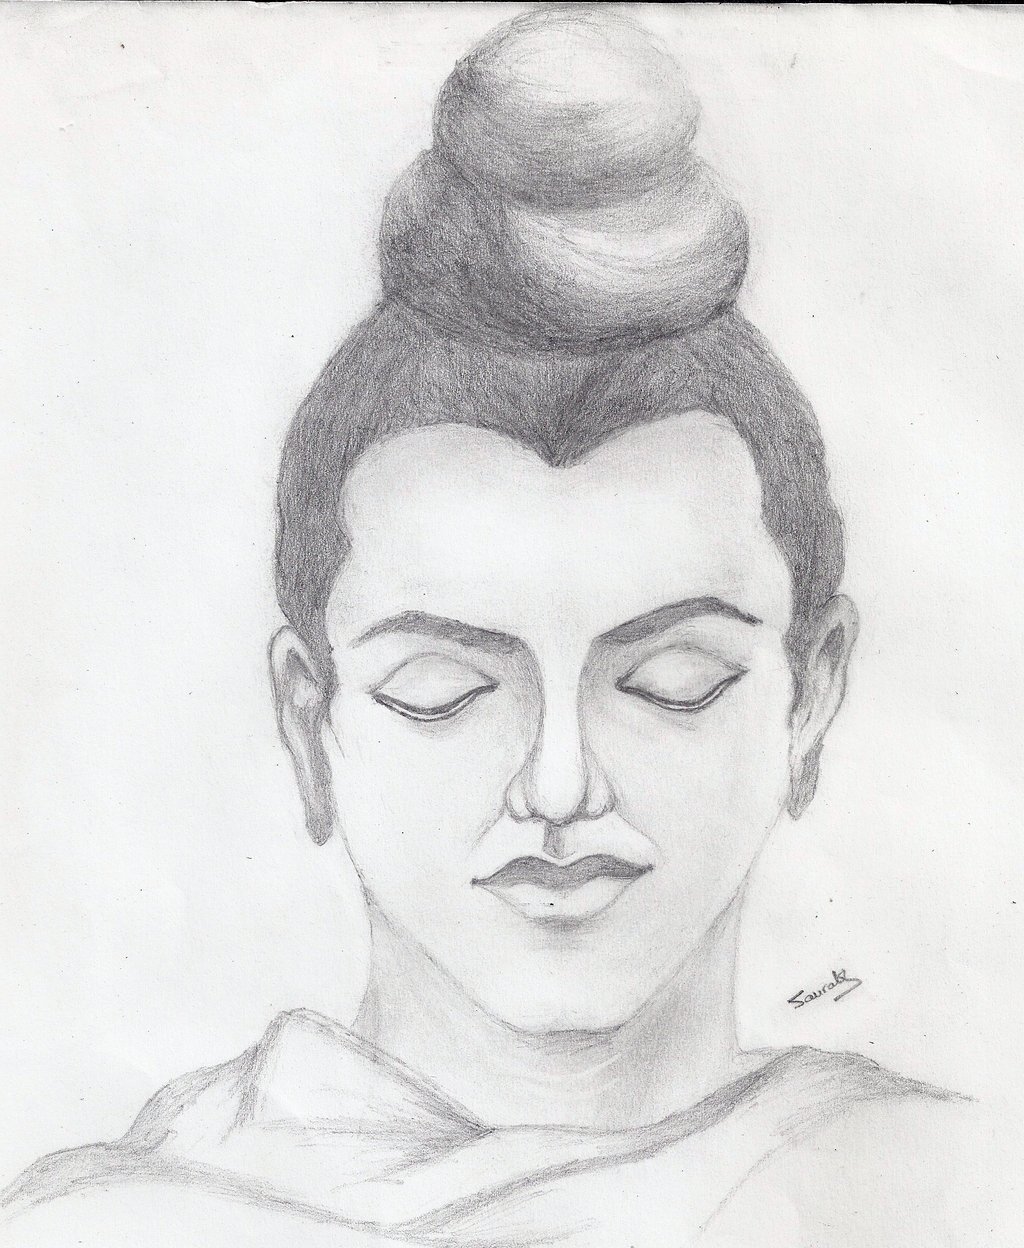 Buddha image in pencil drawing style - Stock Image - Everypixel